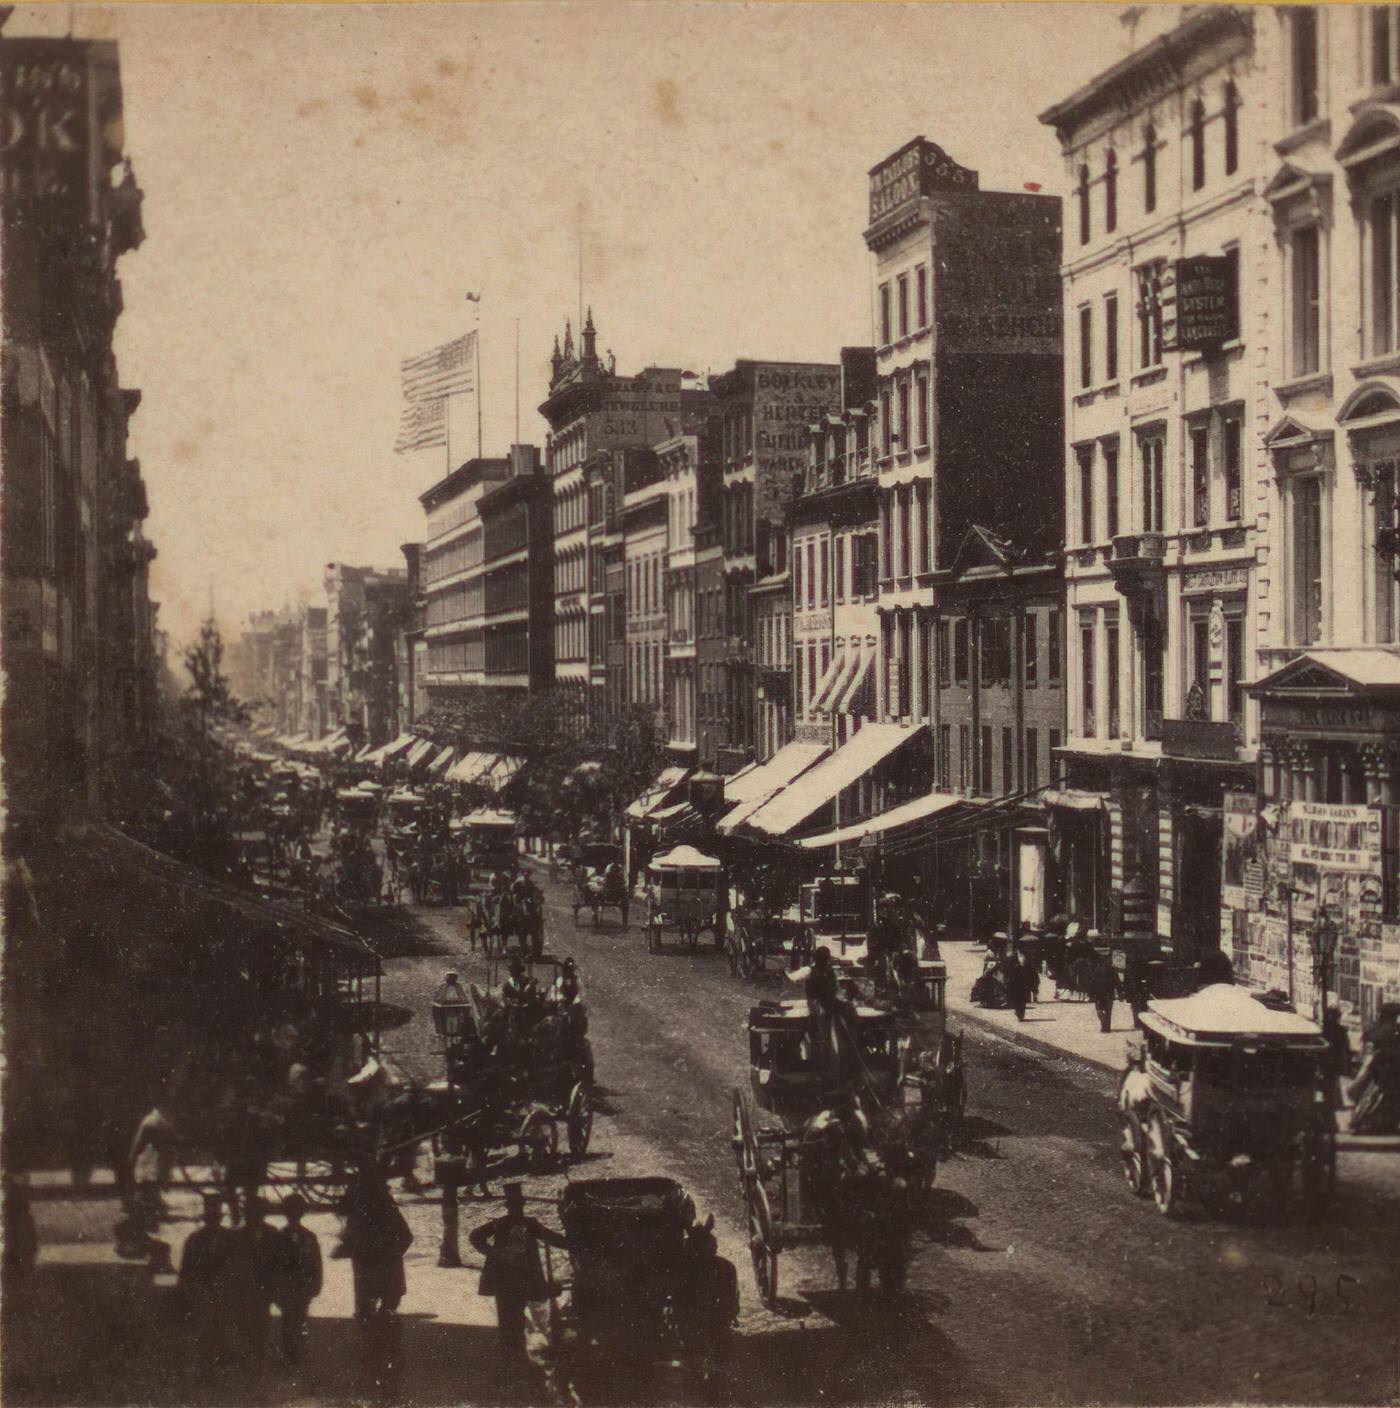 Broadway From The Balcony Of The Metropolitan, Looking South, St. Nicholas In The Distance, New York, Manhattan, 1860